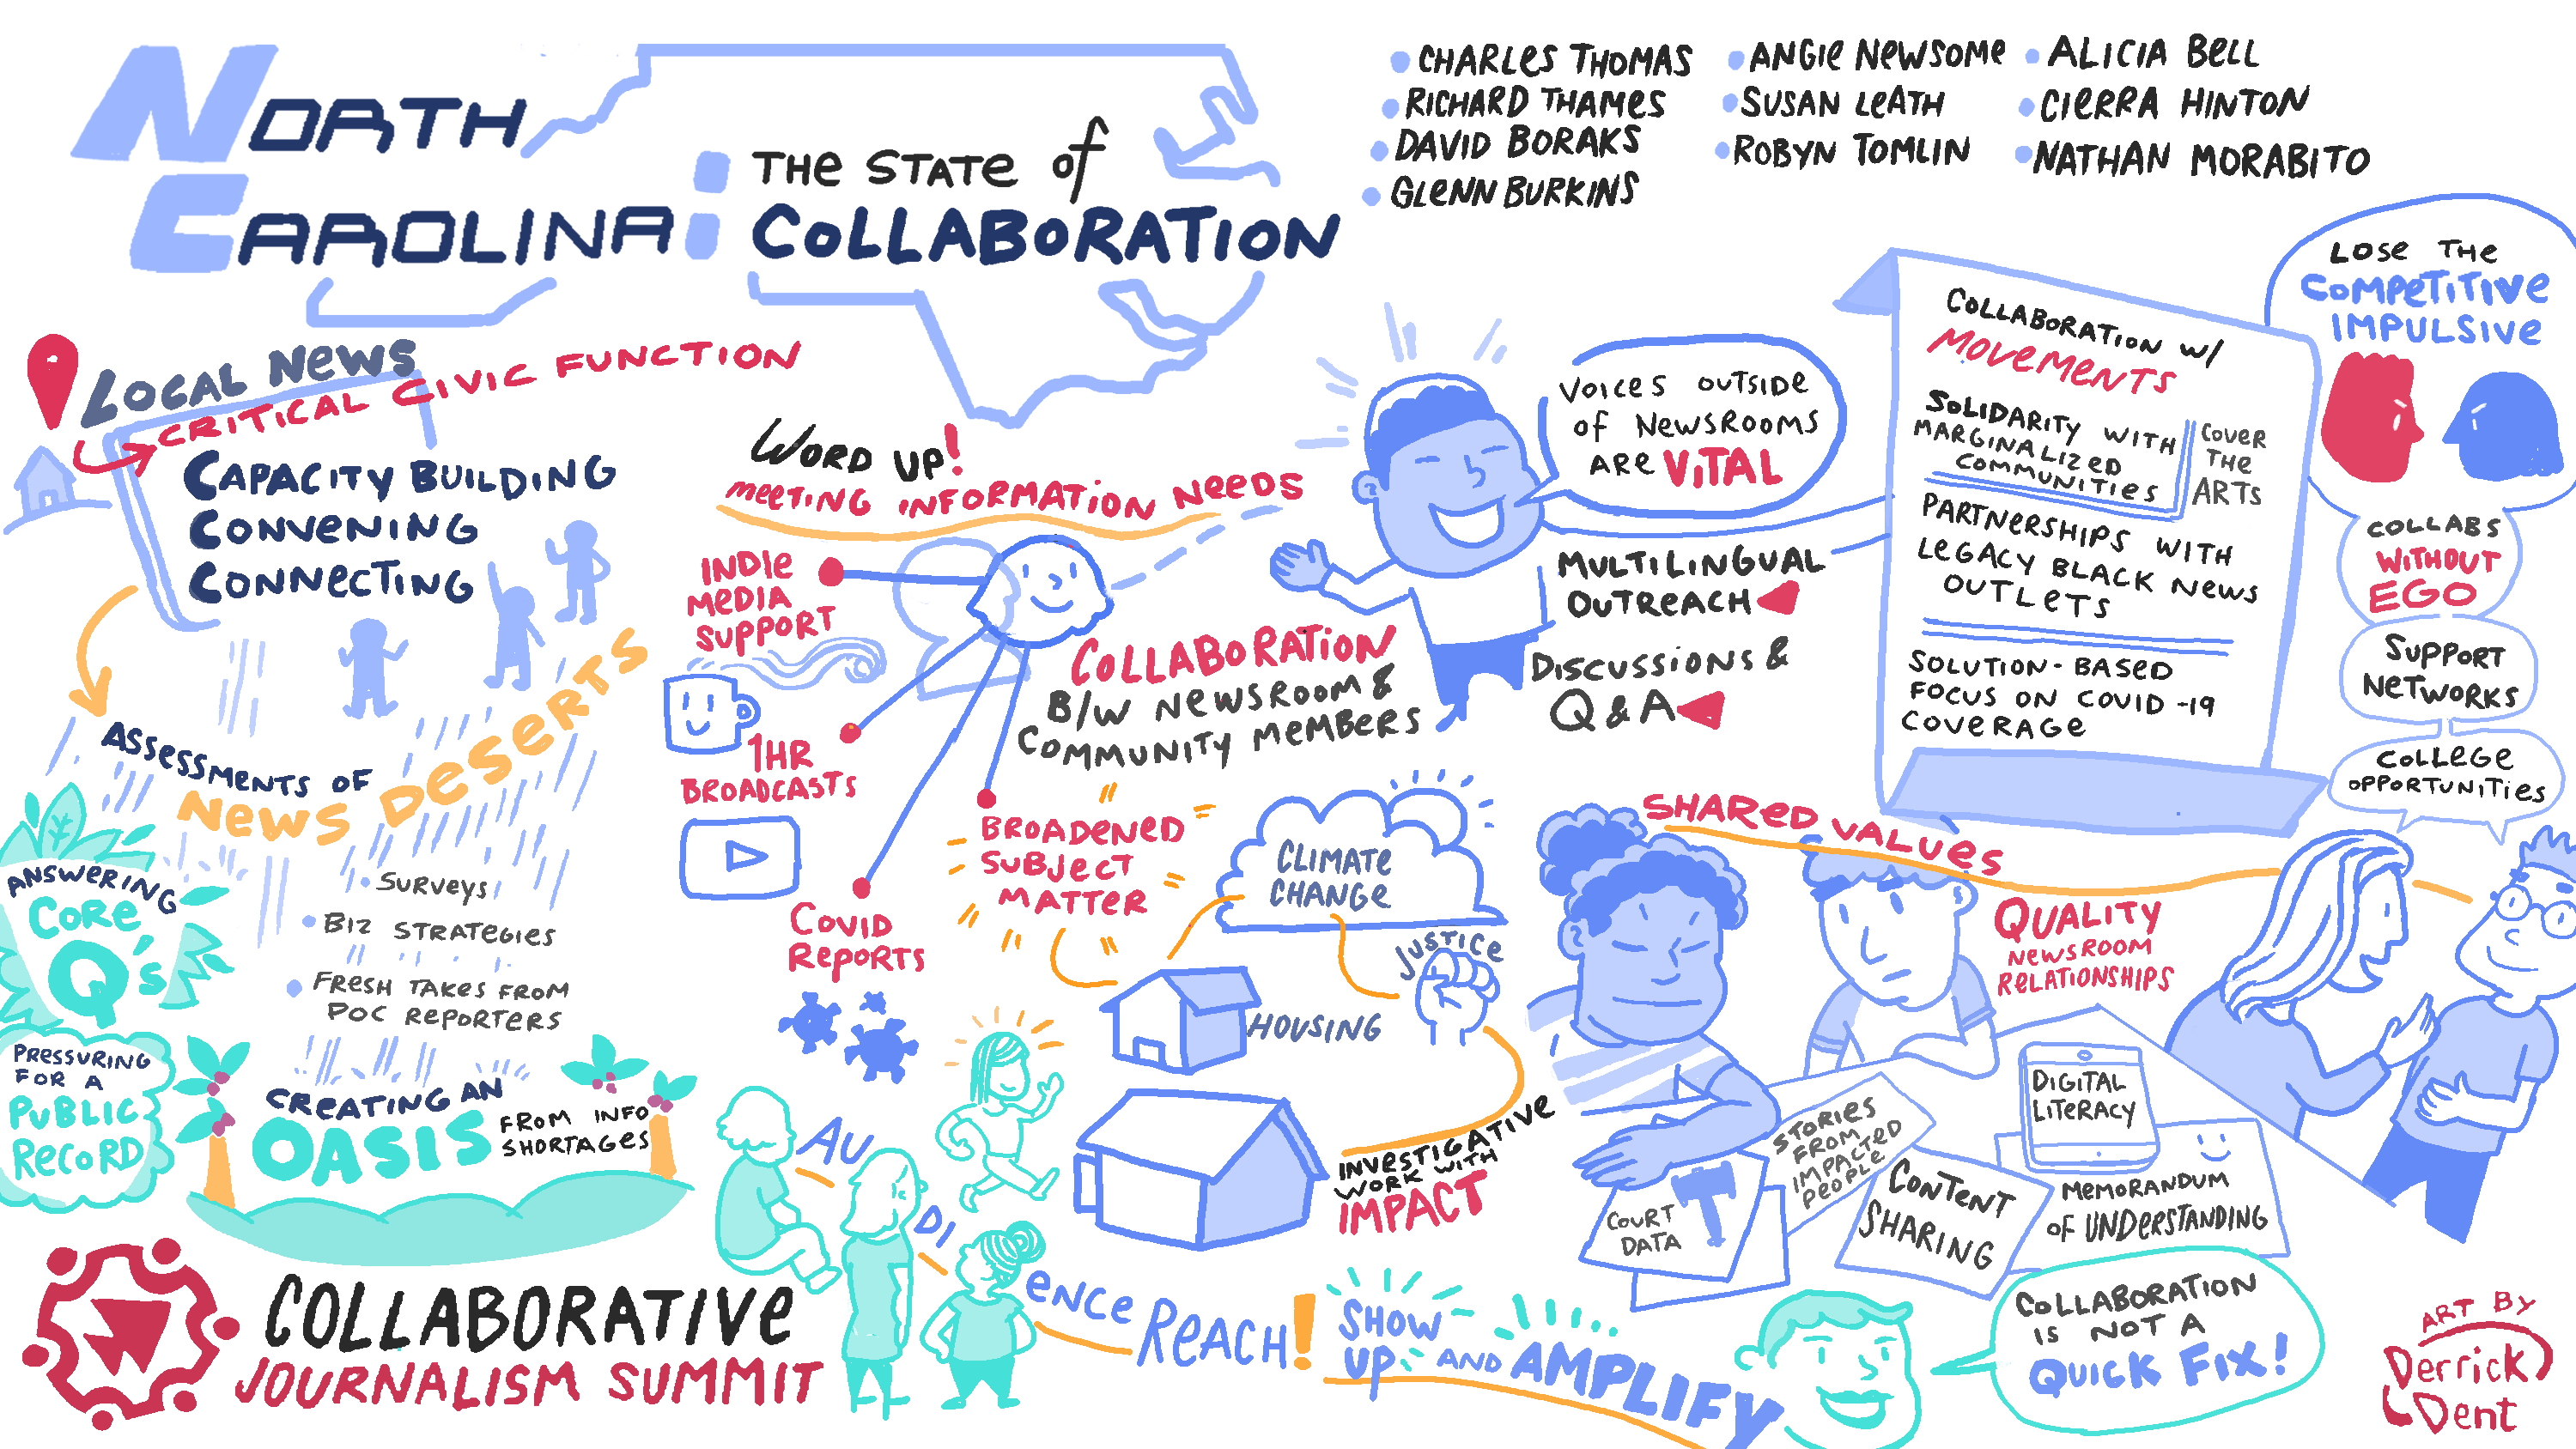 Lessons from the Collaborative Journalism Summit